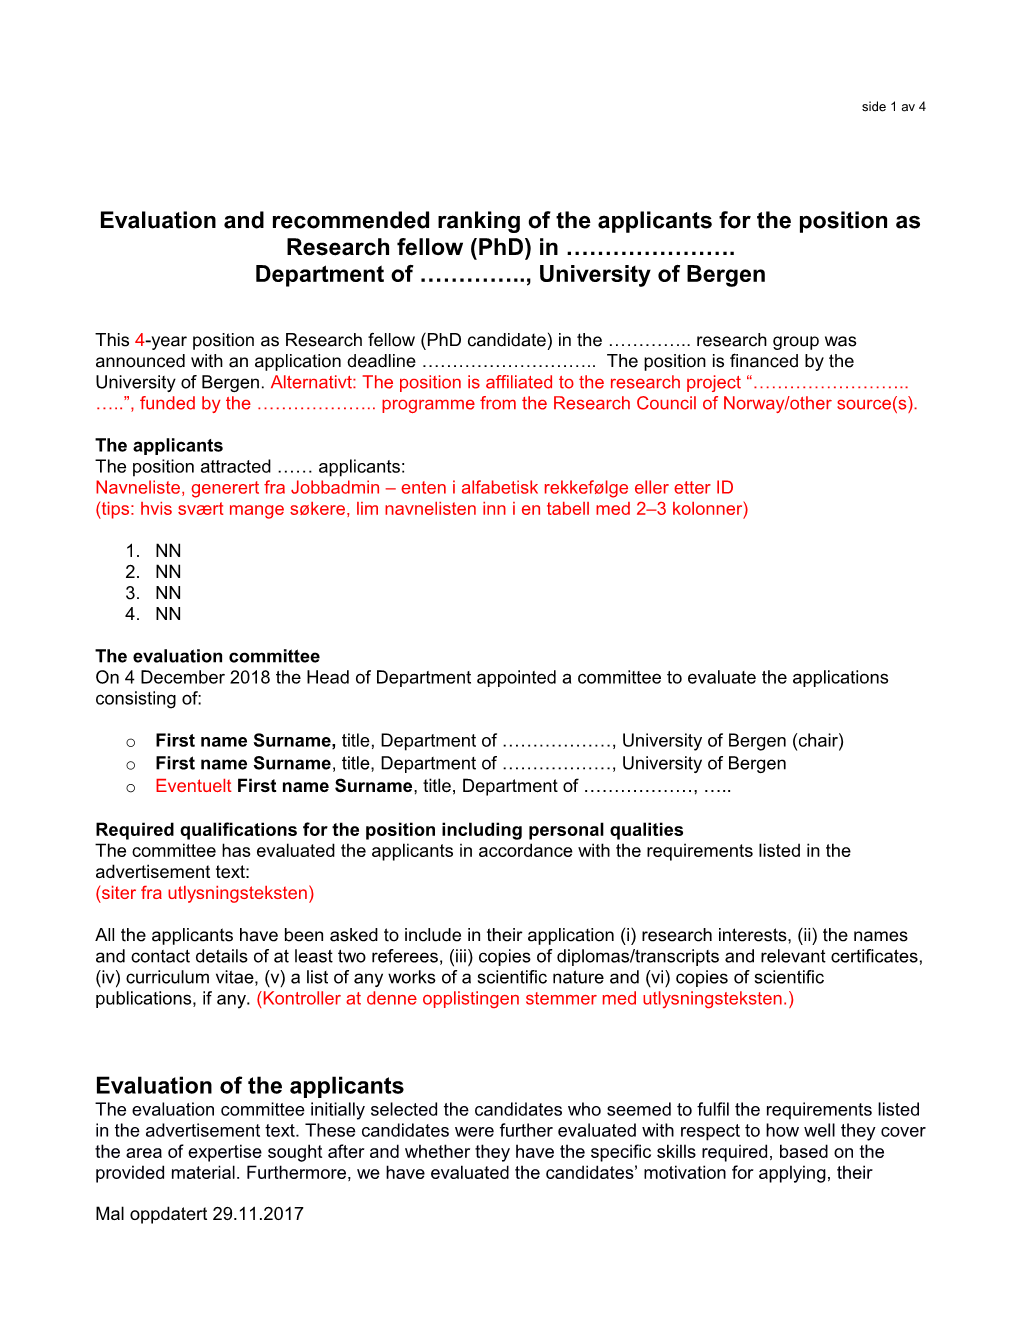 Evaluation and Recommended Ranking of the Applicants for the Position As Research Fellow